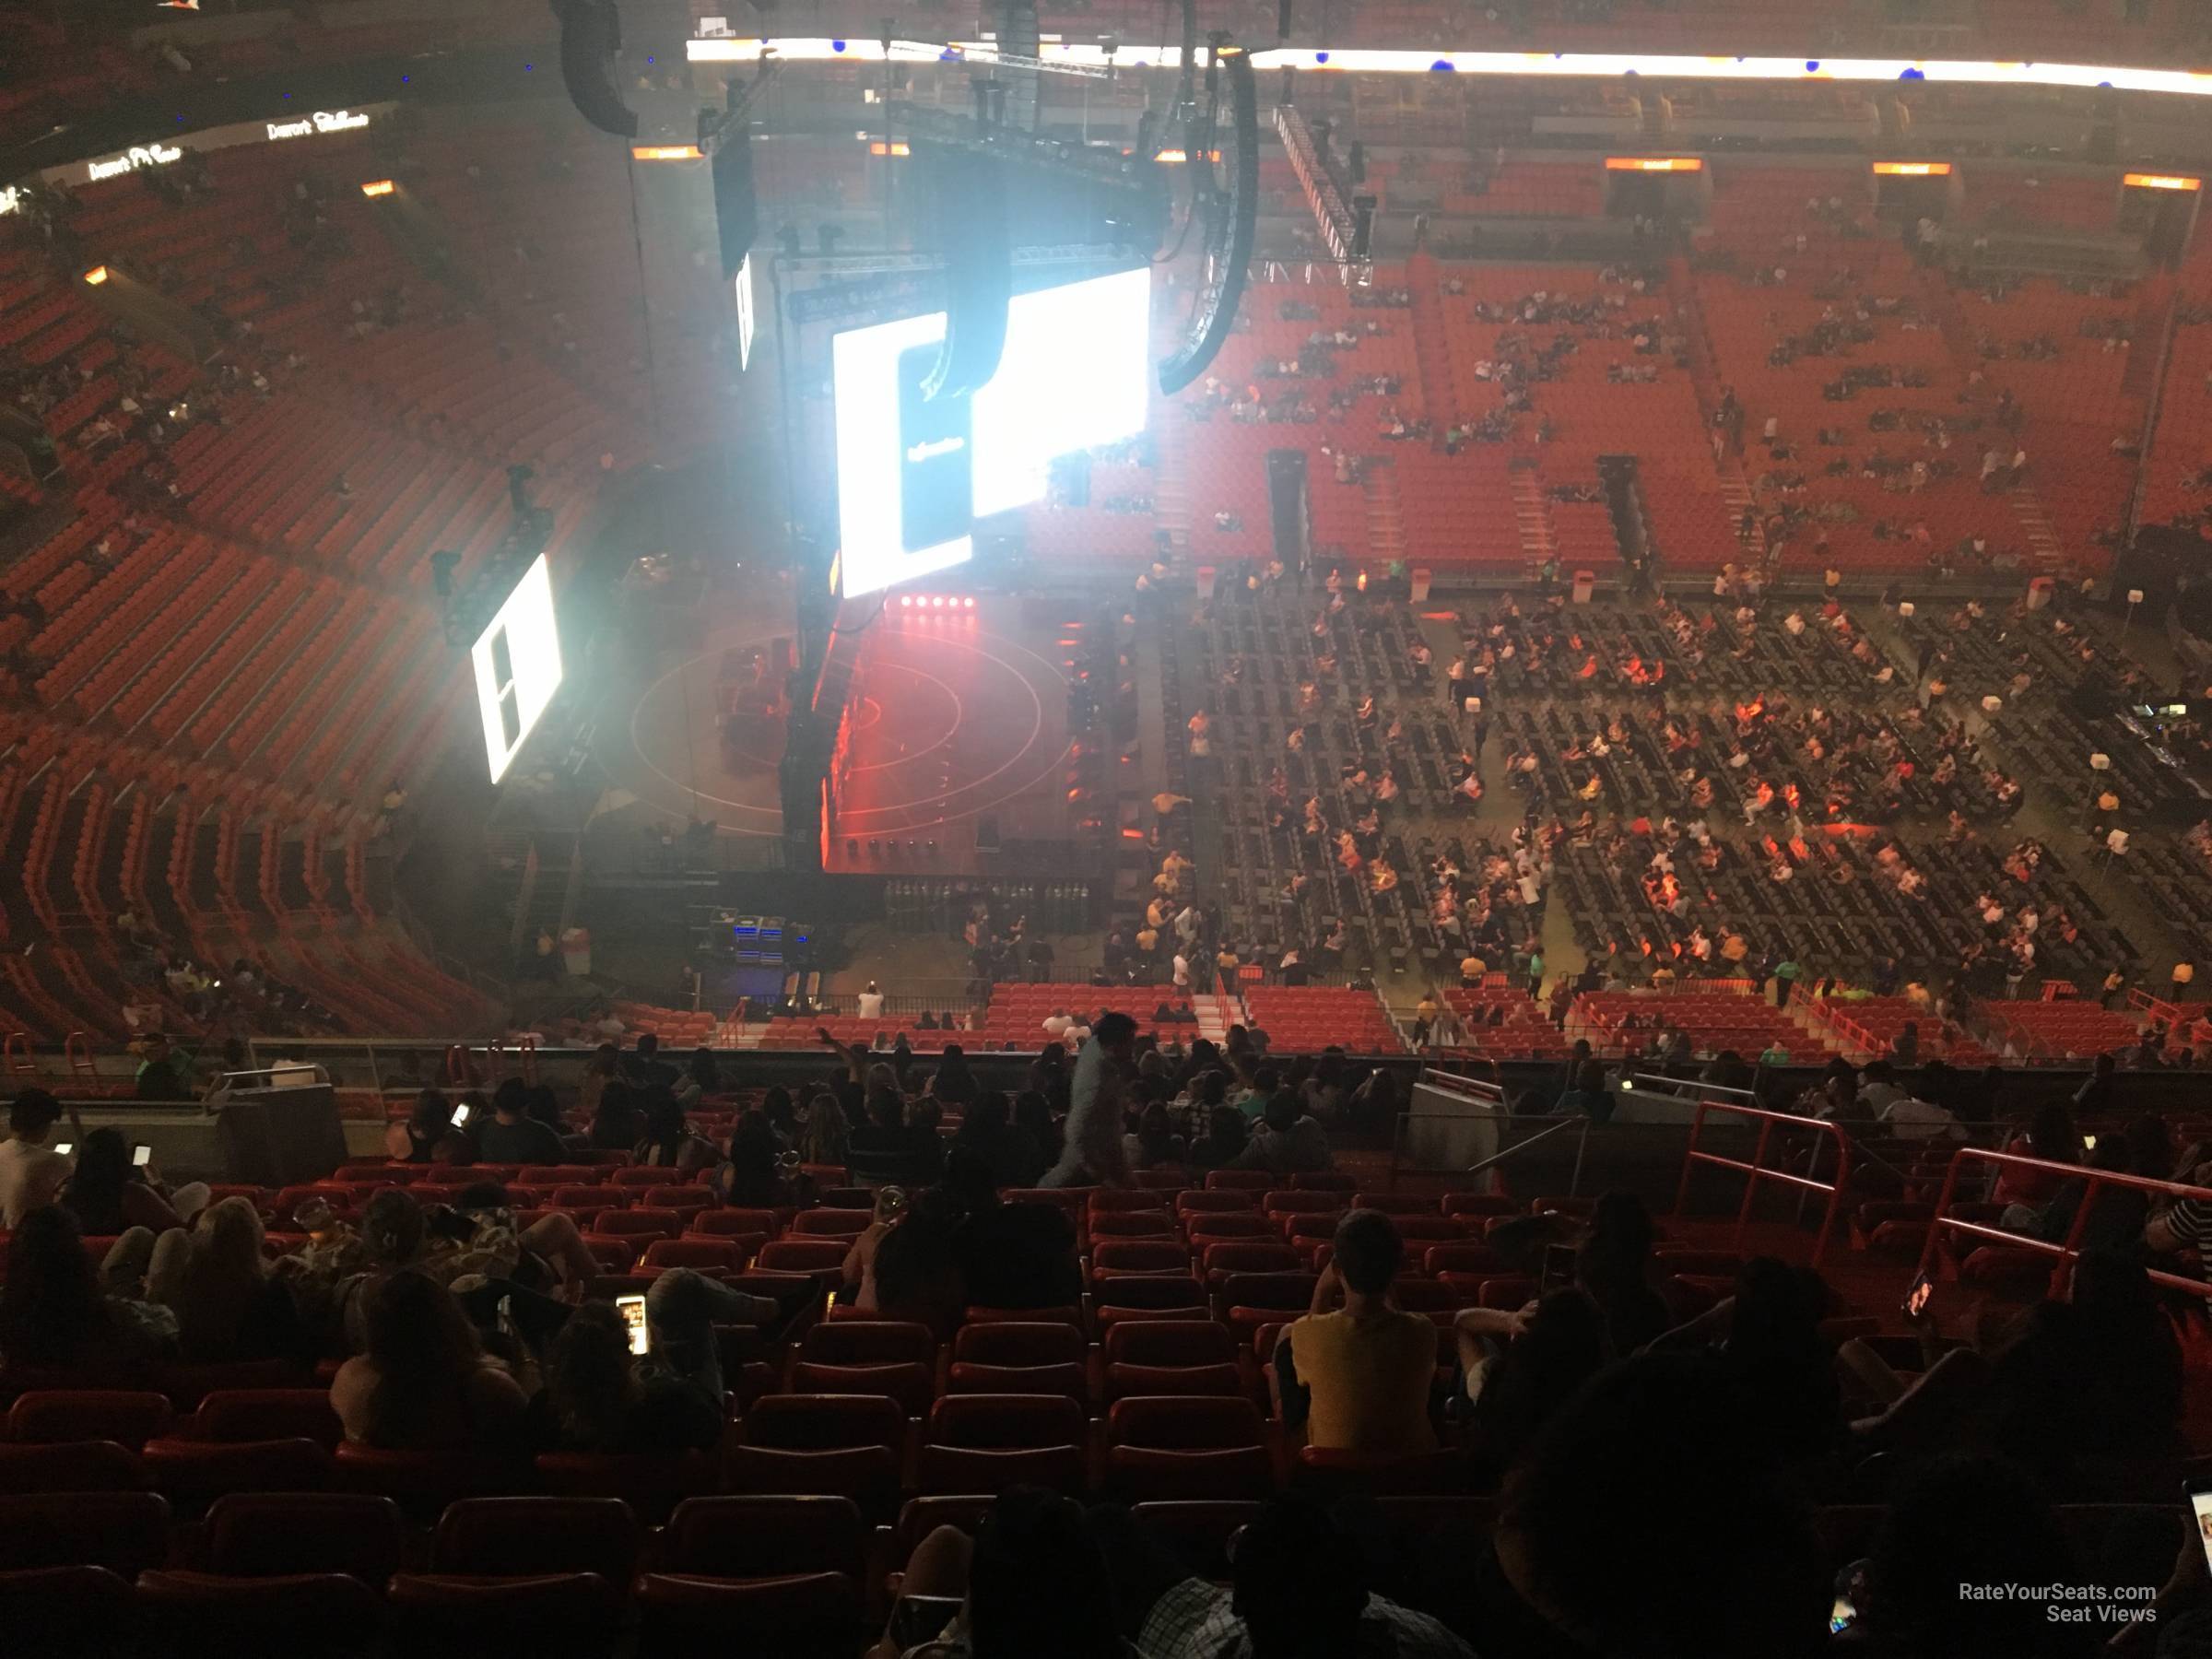 section 326, row 18 seat view  for concert - kaseya center